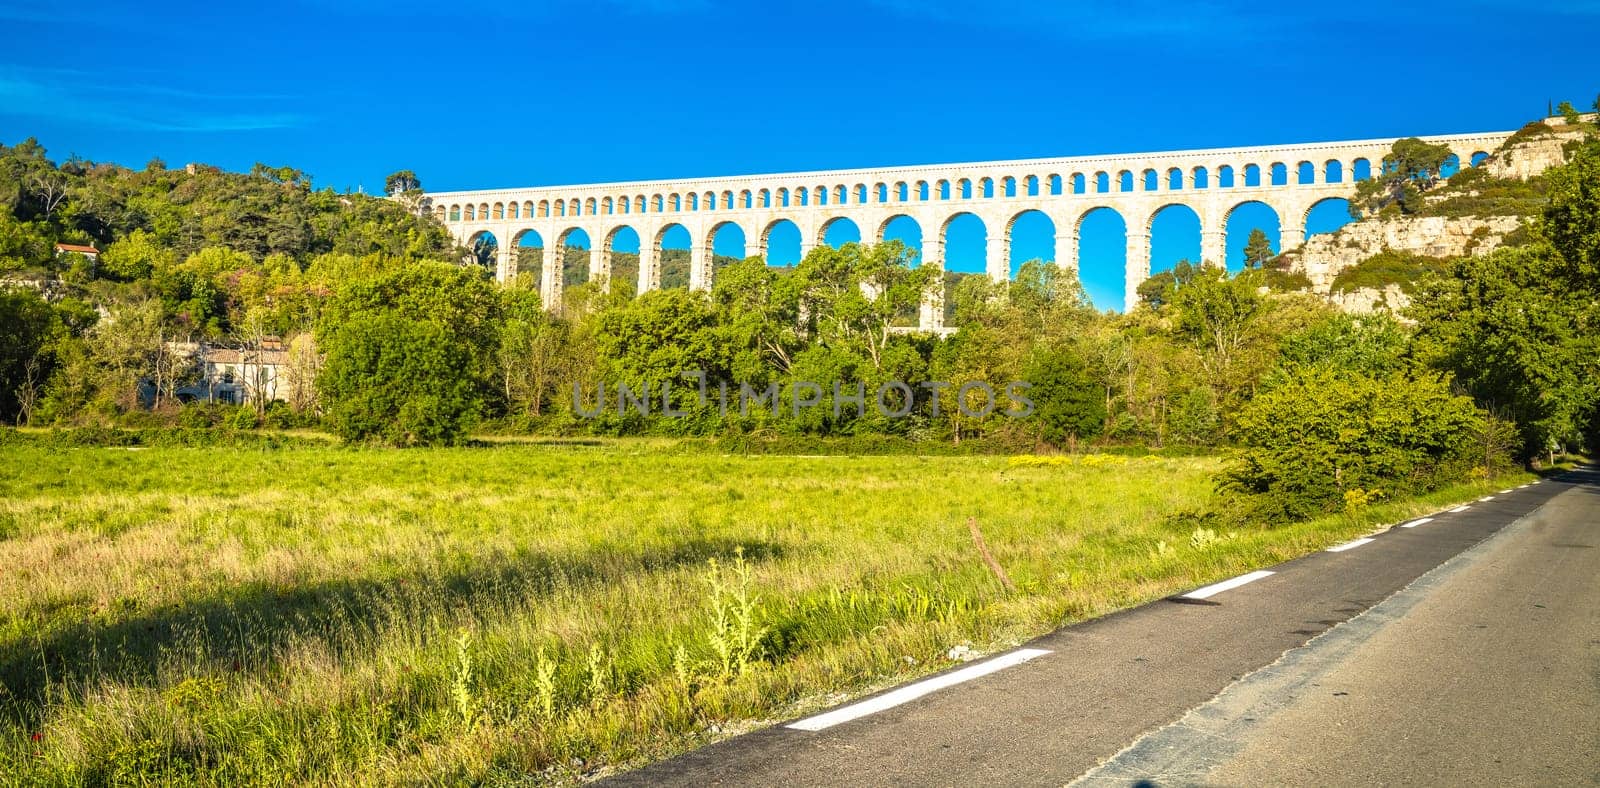 Roquefavour stone Aqueduct in green landscape panoramic view, landmark of southern France